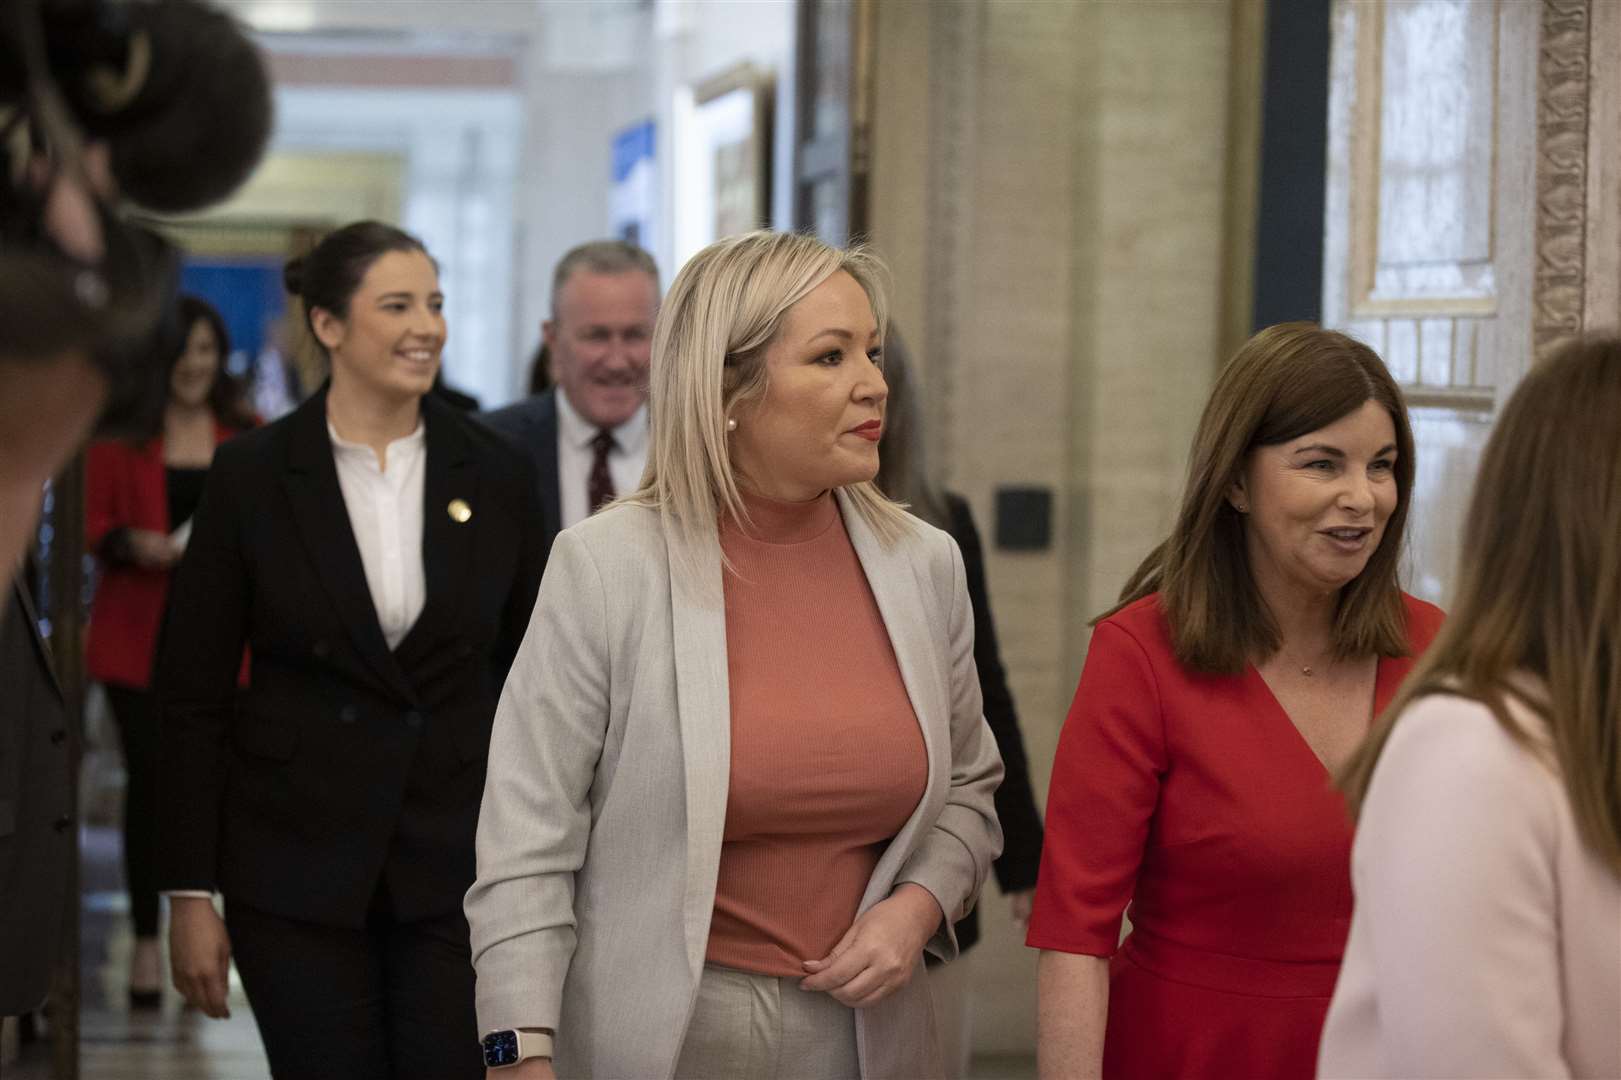 Sinn Fein’s Michelle O’Neill, centre, has condemned the DUP’s stance (Liam McBurney/PA)